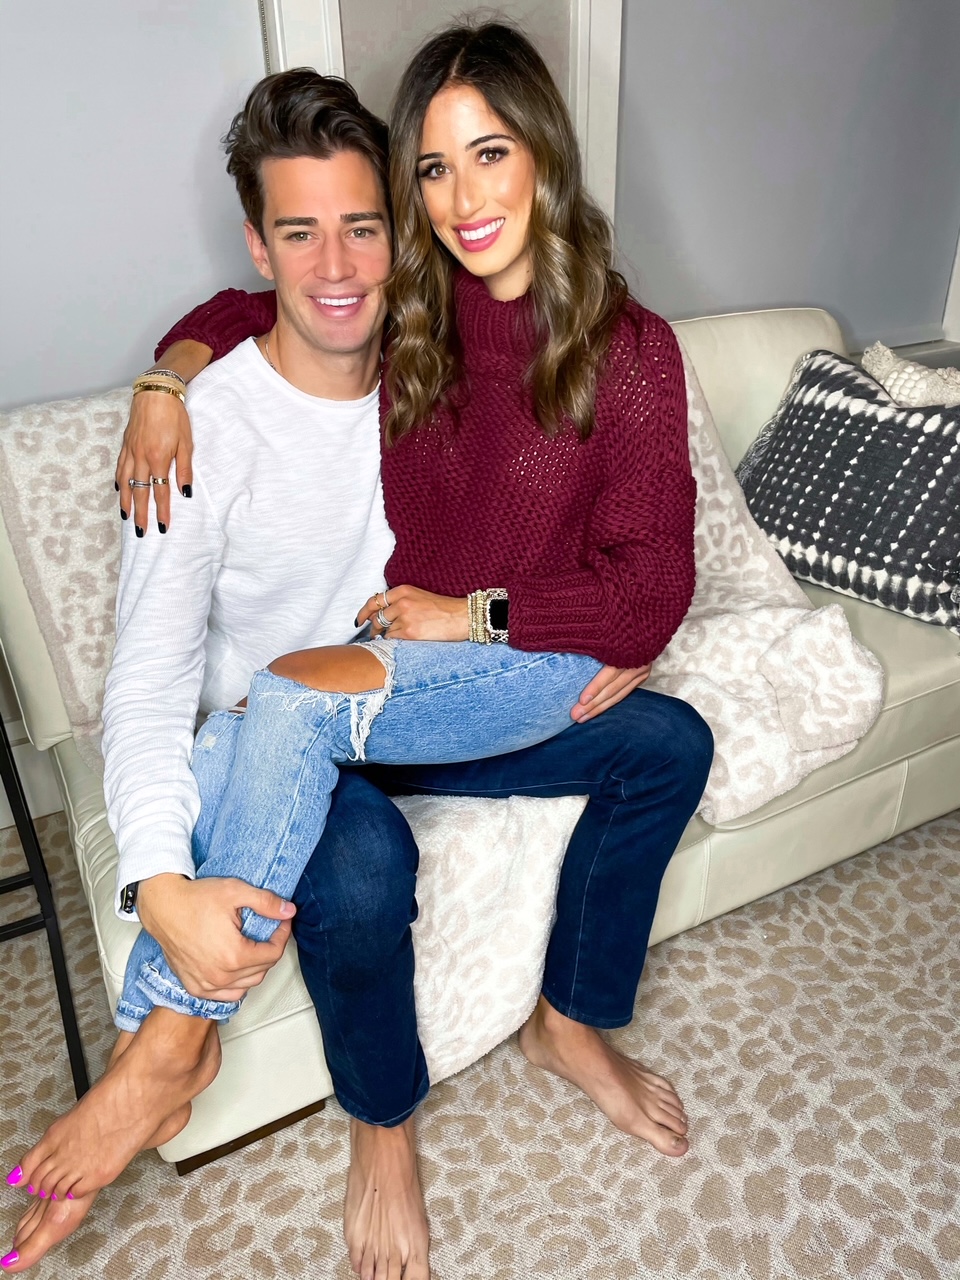 lifestyle and fashion bloggers alexis and samantha belbel sharing their holiday gift guide 2020: gift ideas for him- kiehl's shave set, ugg robe, ugg slippers, bluetooth speaker, Tumi Dopp kit, tom ford sunglasses, camo duffel bag and more | adoubledose.com